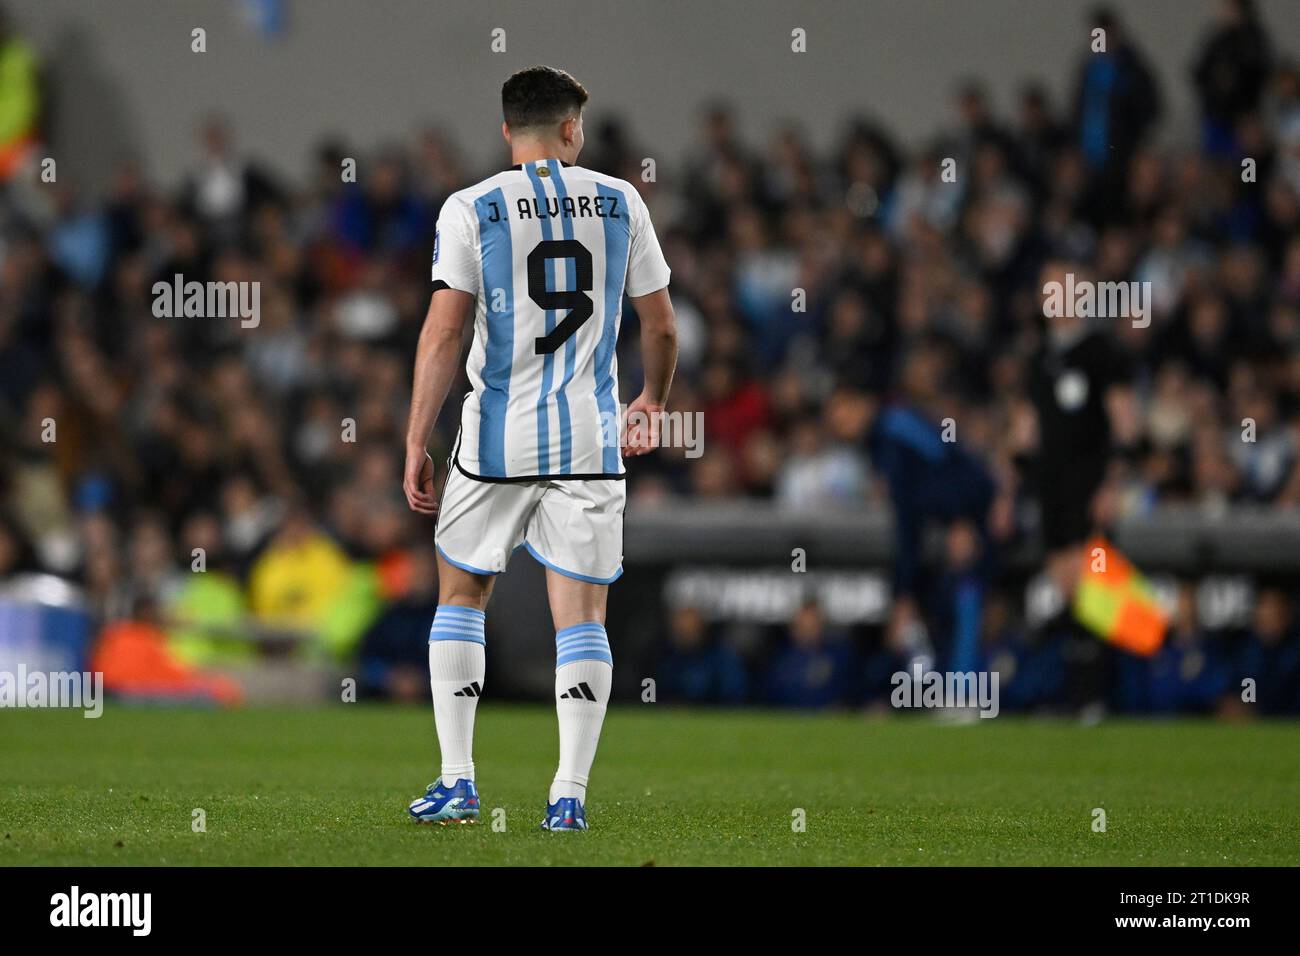 BUENOS AIRES, ARGENTINA - OCTOBER 12: {persons] of Argentina during the FIFA World Cup 2026 Qualifier match between Argentina and Paraguay at Estadio Stock Photo